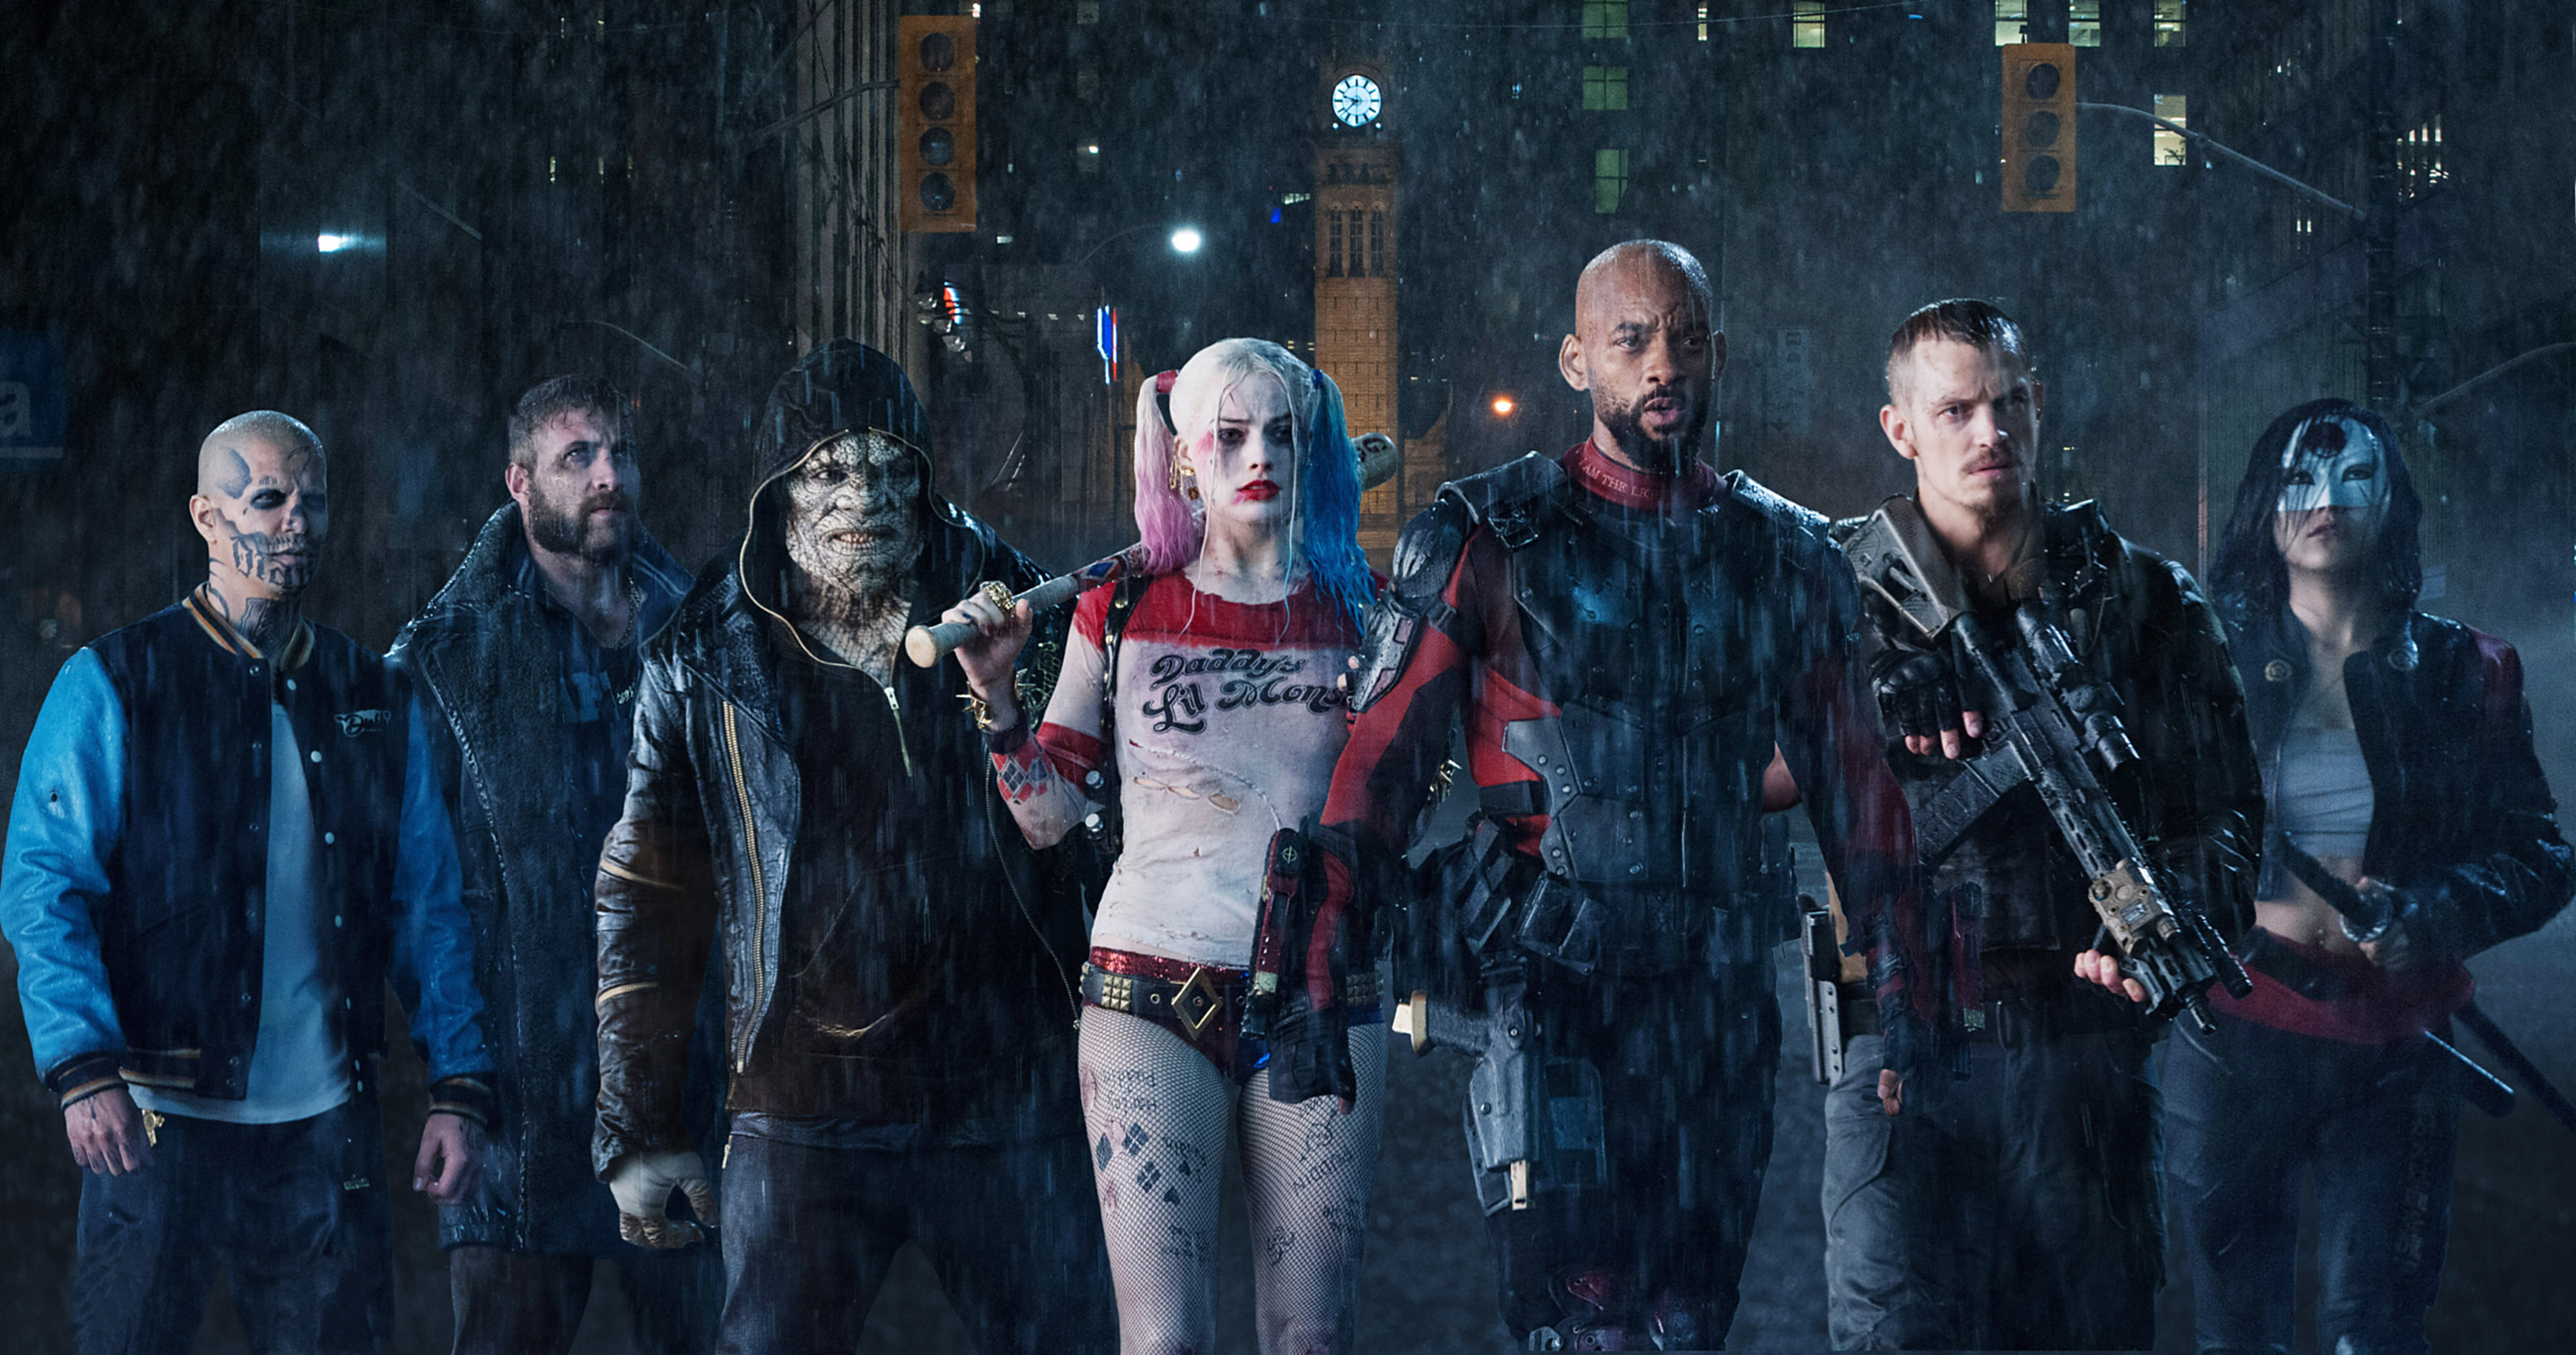 A group of people dressed as characters from the film Suicide Squad, including Harley Quinn, standing in the rain at night